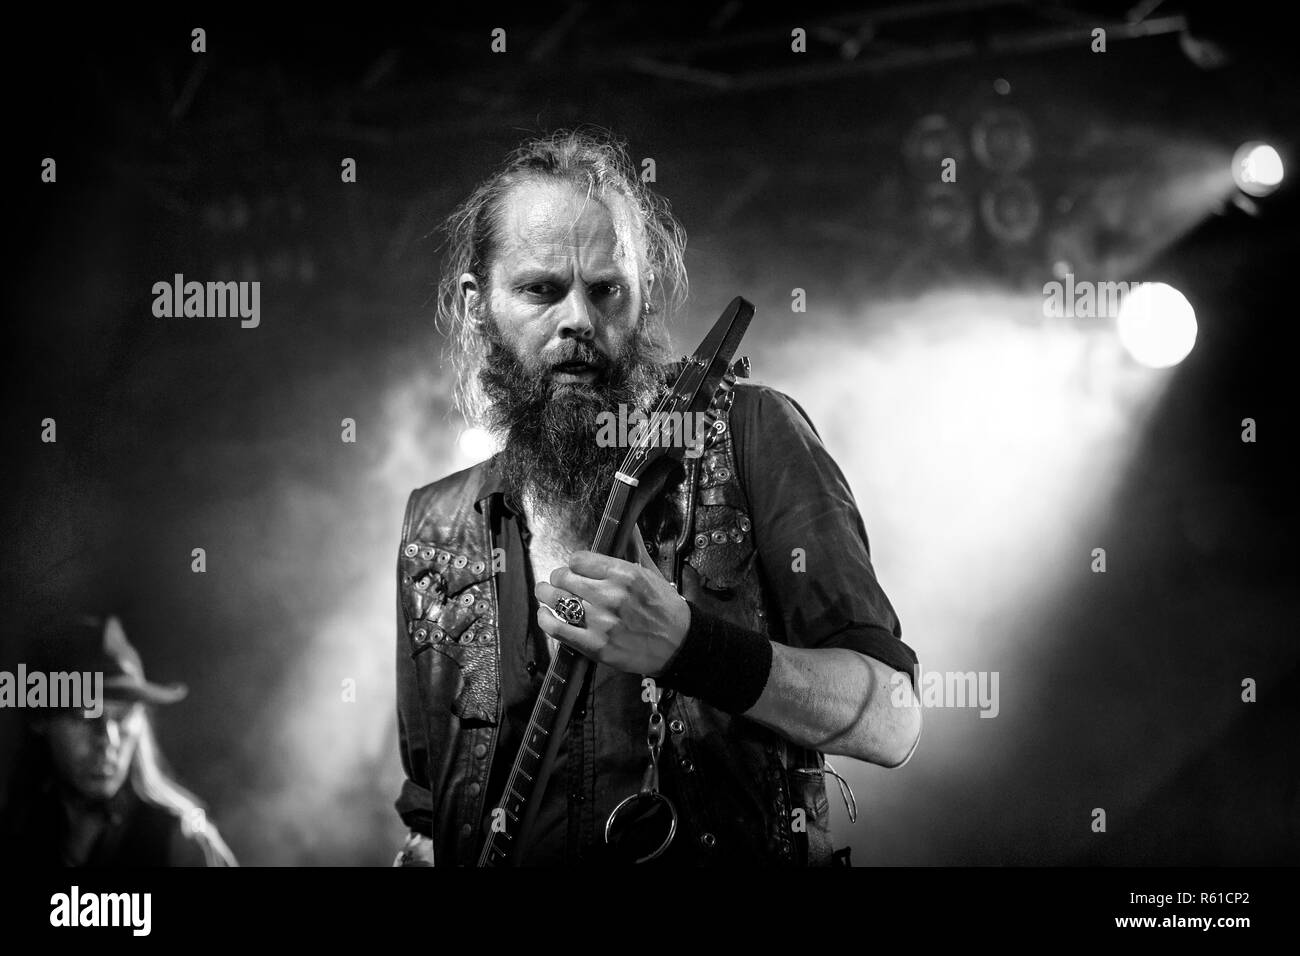 Norway, Oslo - November 30, 2018. The Icelandic heavy metal band Sólstafir performs a live concert at Vulkan Arena in Oslo. Here vocalist and guitarist Addi Tryggvason is seen live on stage. (Photo credit: Gonzales Photo - Terje Dokken). Stock Photo